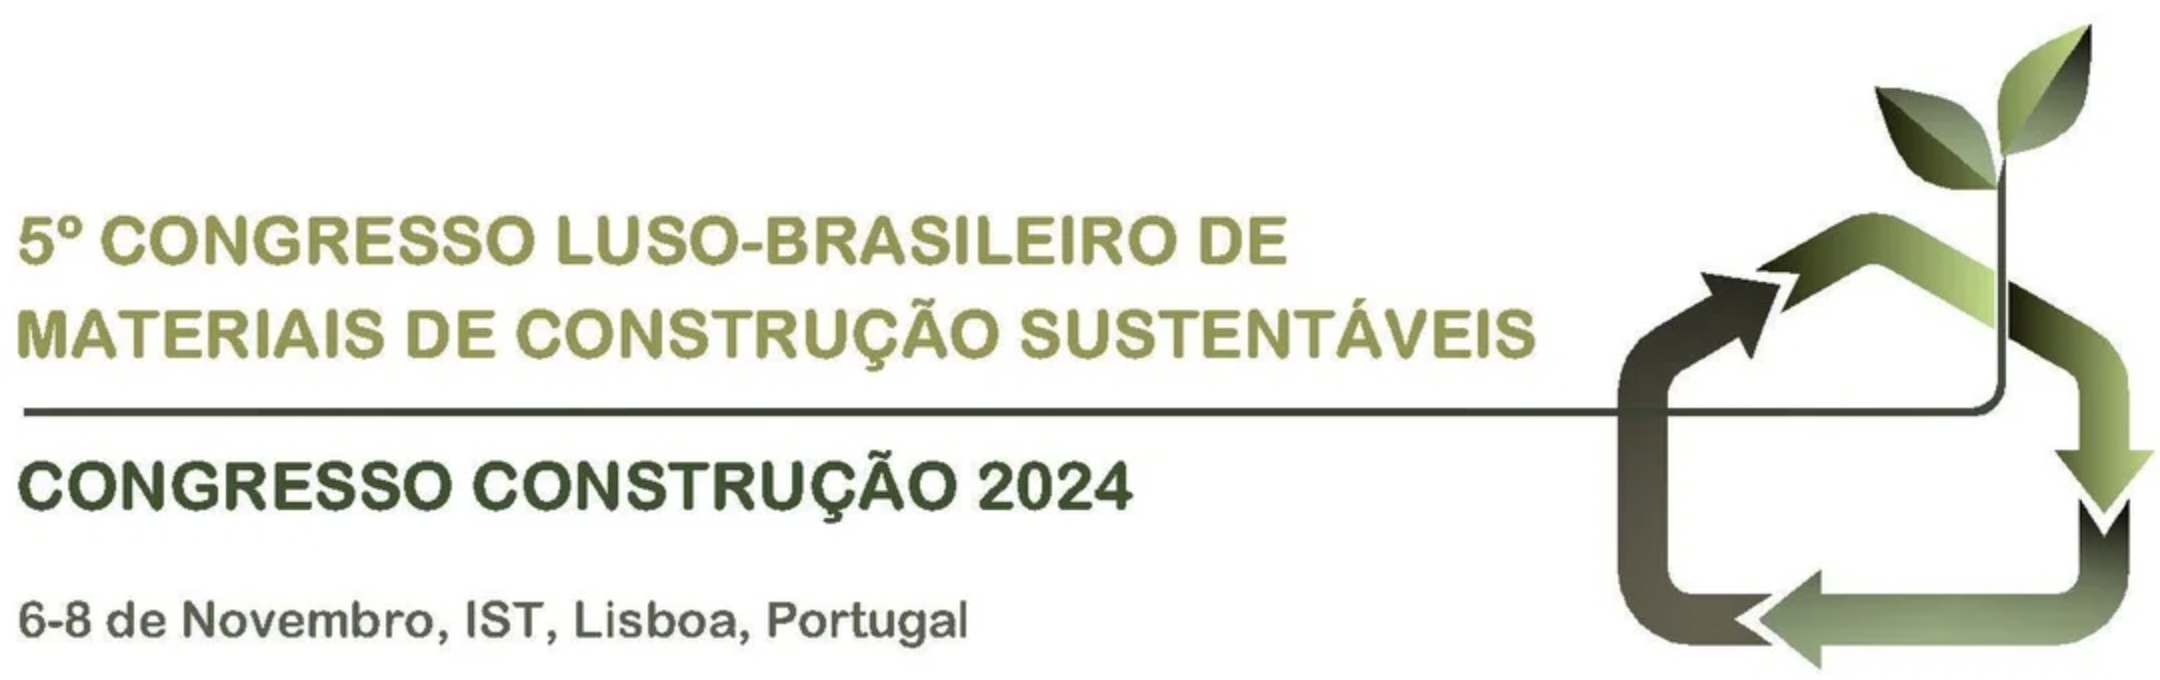 5th Luso-Brazilian Congress on Sustainable Building Materials (CLBMCS 2024) and Construction Congress 2024